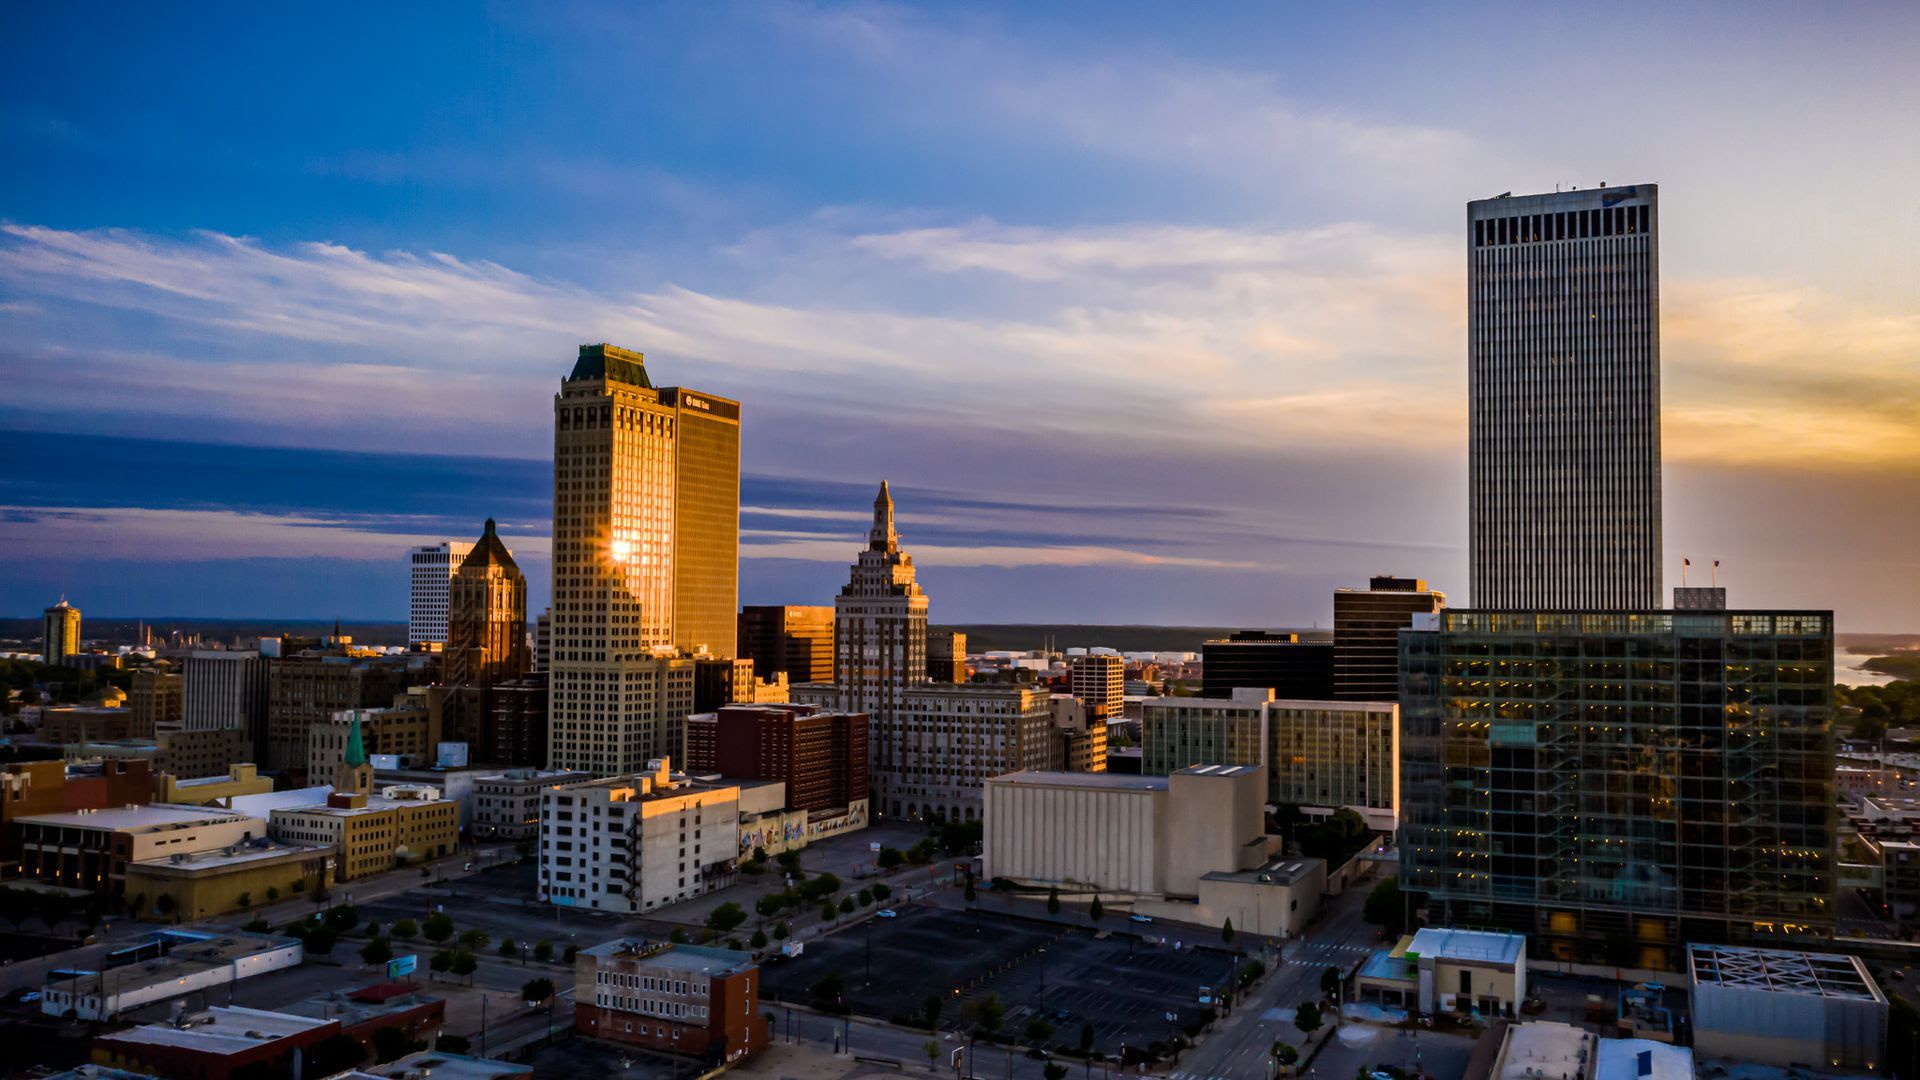 Oklahoma's second-largest city has been known as the "oil capital of the world." At right is the BOK Tower, Tulsa's tallest building. Photo: Phil Clarkin/Phil Clarkin Photography